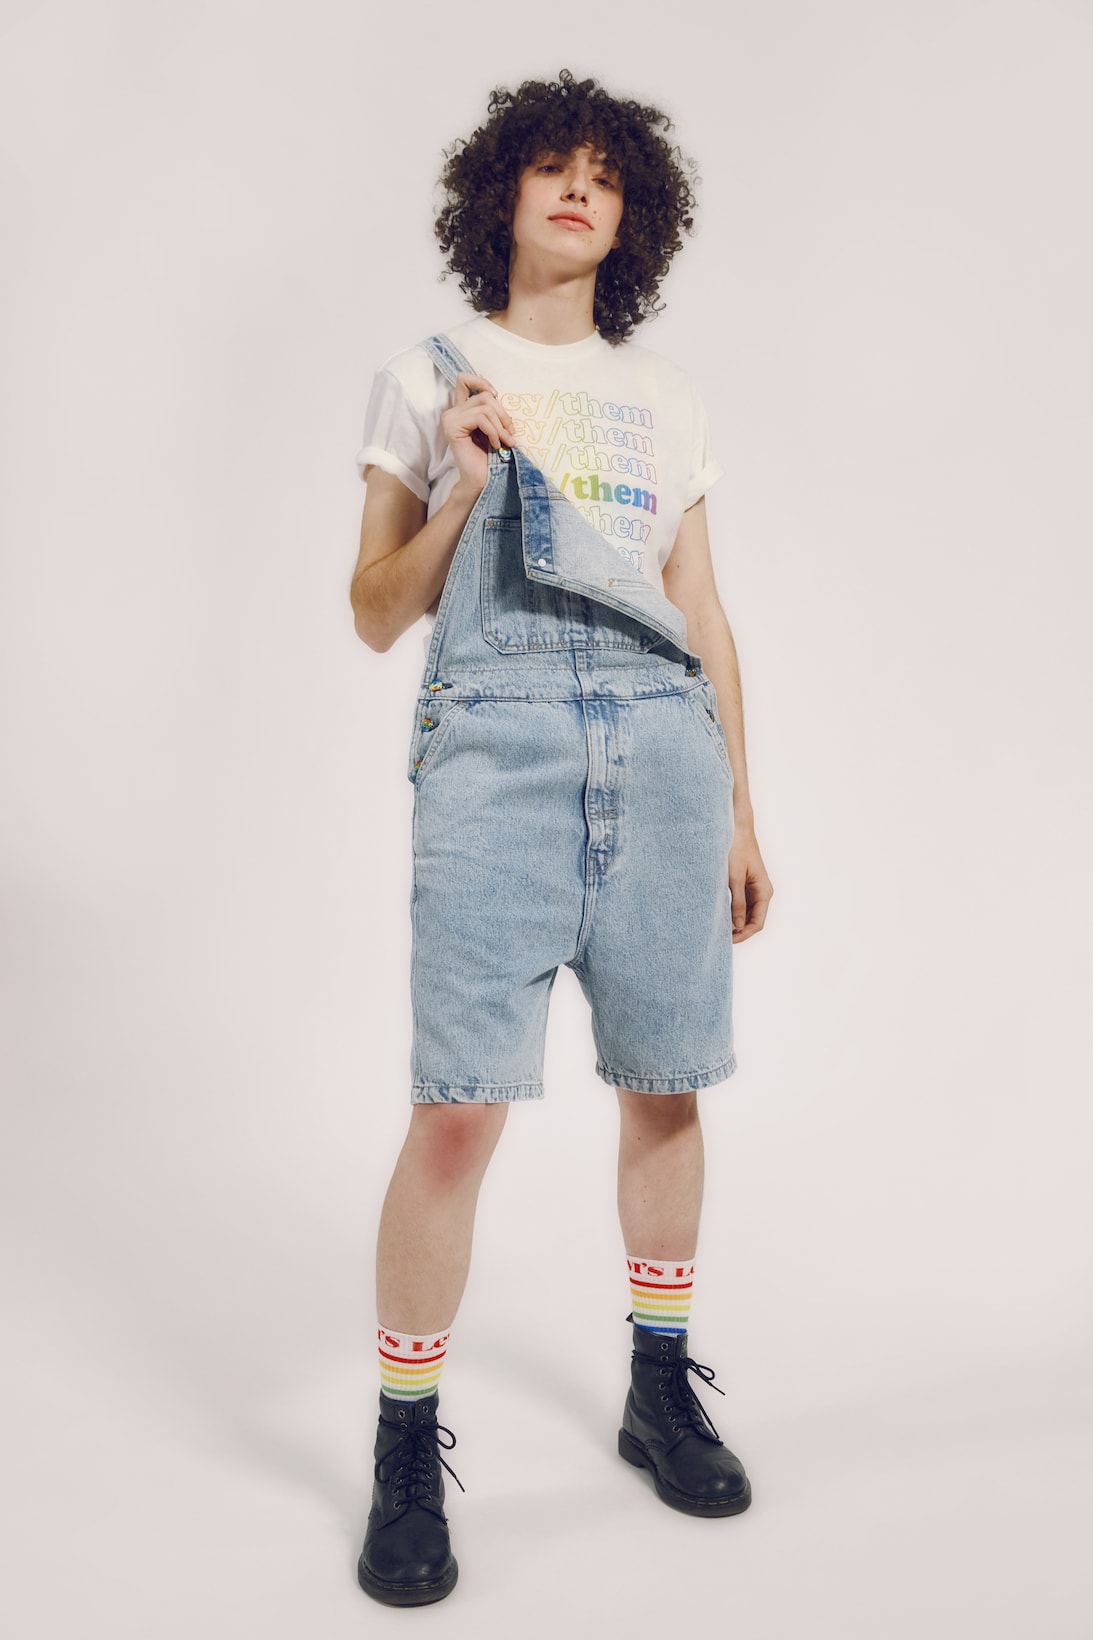 levis pride lgbtqia collection all pronouns love tee t shirt denim overall